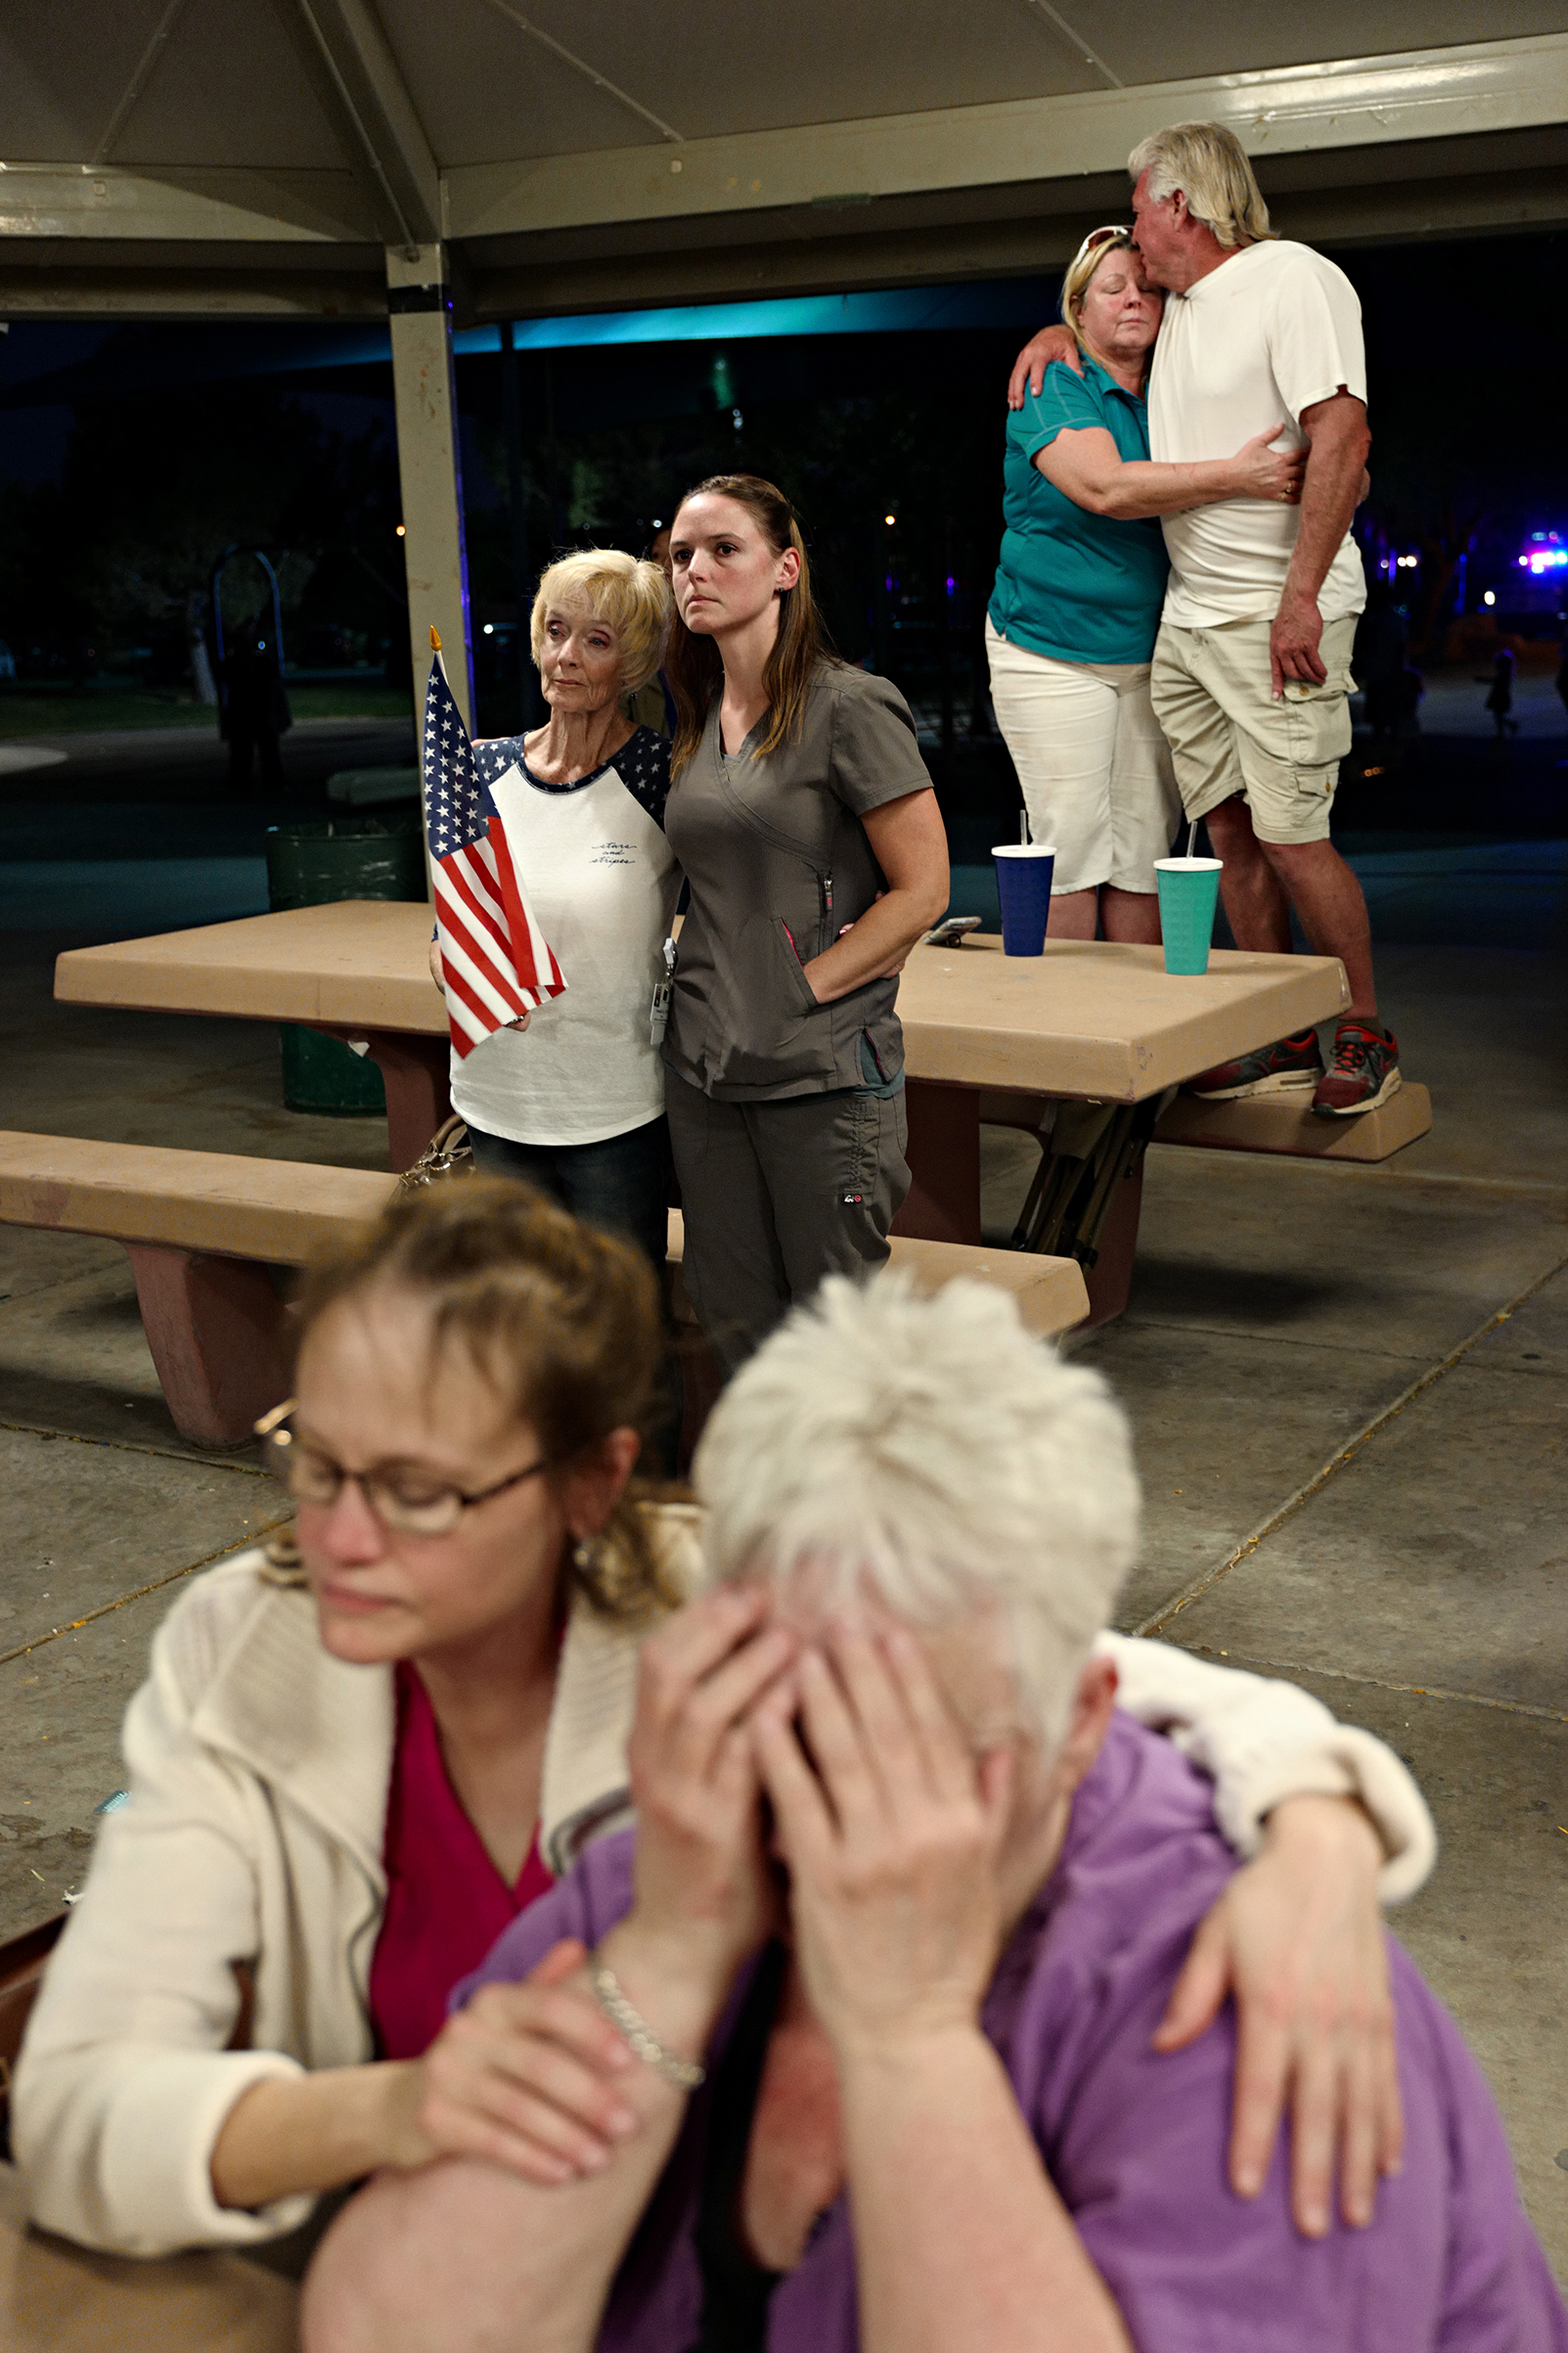 A prayer vigil held at Mountain Crest Park for the victims of Sunday night's shooting on October 3, 2017 in Las Vegas, Nevada.Matt Stuart—Magnum for TIMEA prayer vigil held at Mountain Crest Park for the victims of Sunday night's shooting on October 3, 2017 in Las Vegas, Nevada. Garth Courtney/ Cindy Cusimano (back row)Connie Lane (Flag)/Celestial Olave and Maxine Jonson/Janetta Gray (Front row)Matt Stuart—Magnum for TIME